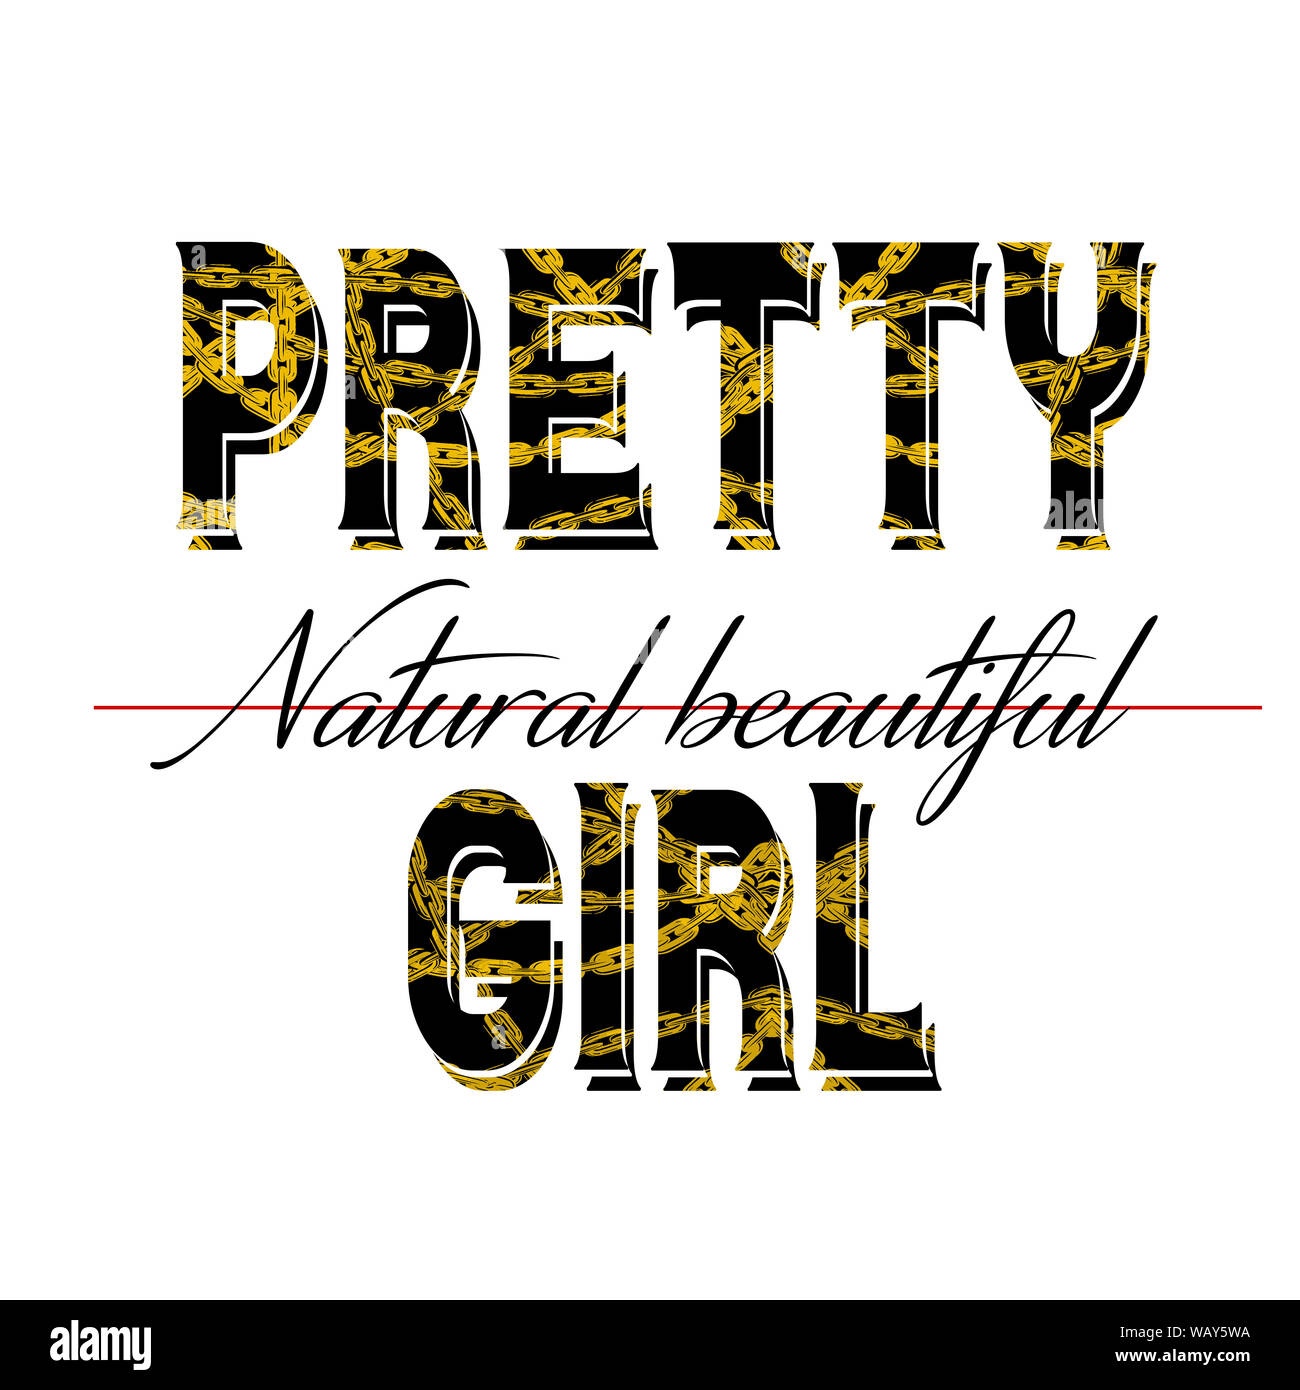 Trendy Fashion T Shirt Print For Textile Pretty Girl Natural Beautiful Design Pattern Stock Photo Alamy,Modern House Design Philippines Two Storey